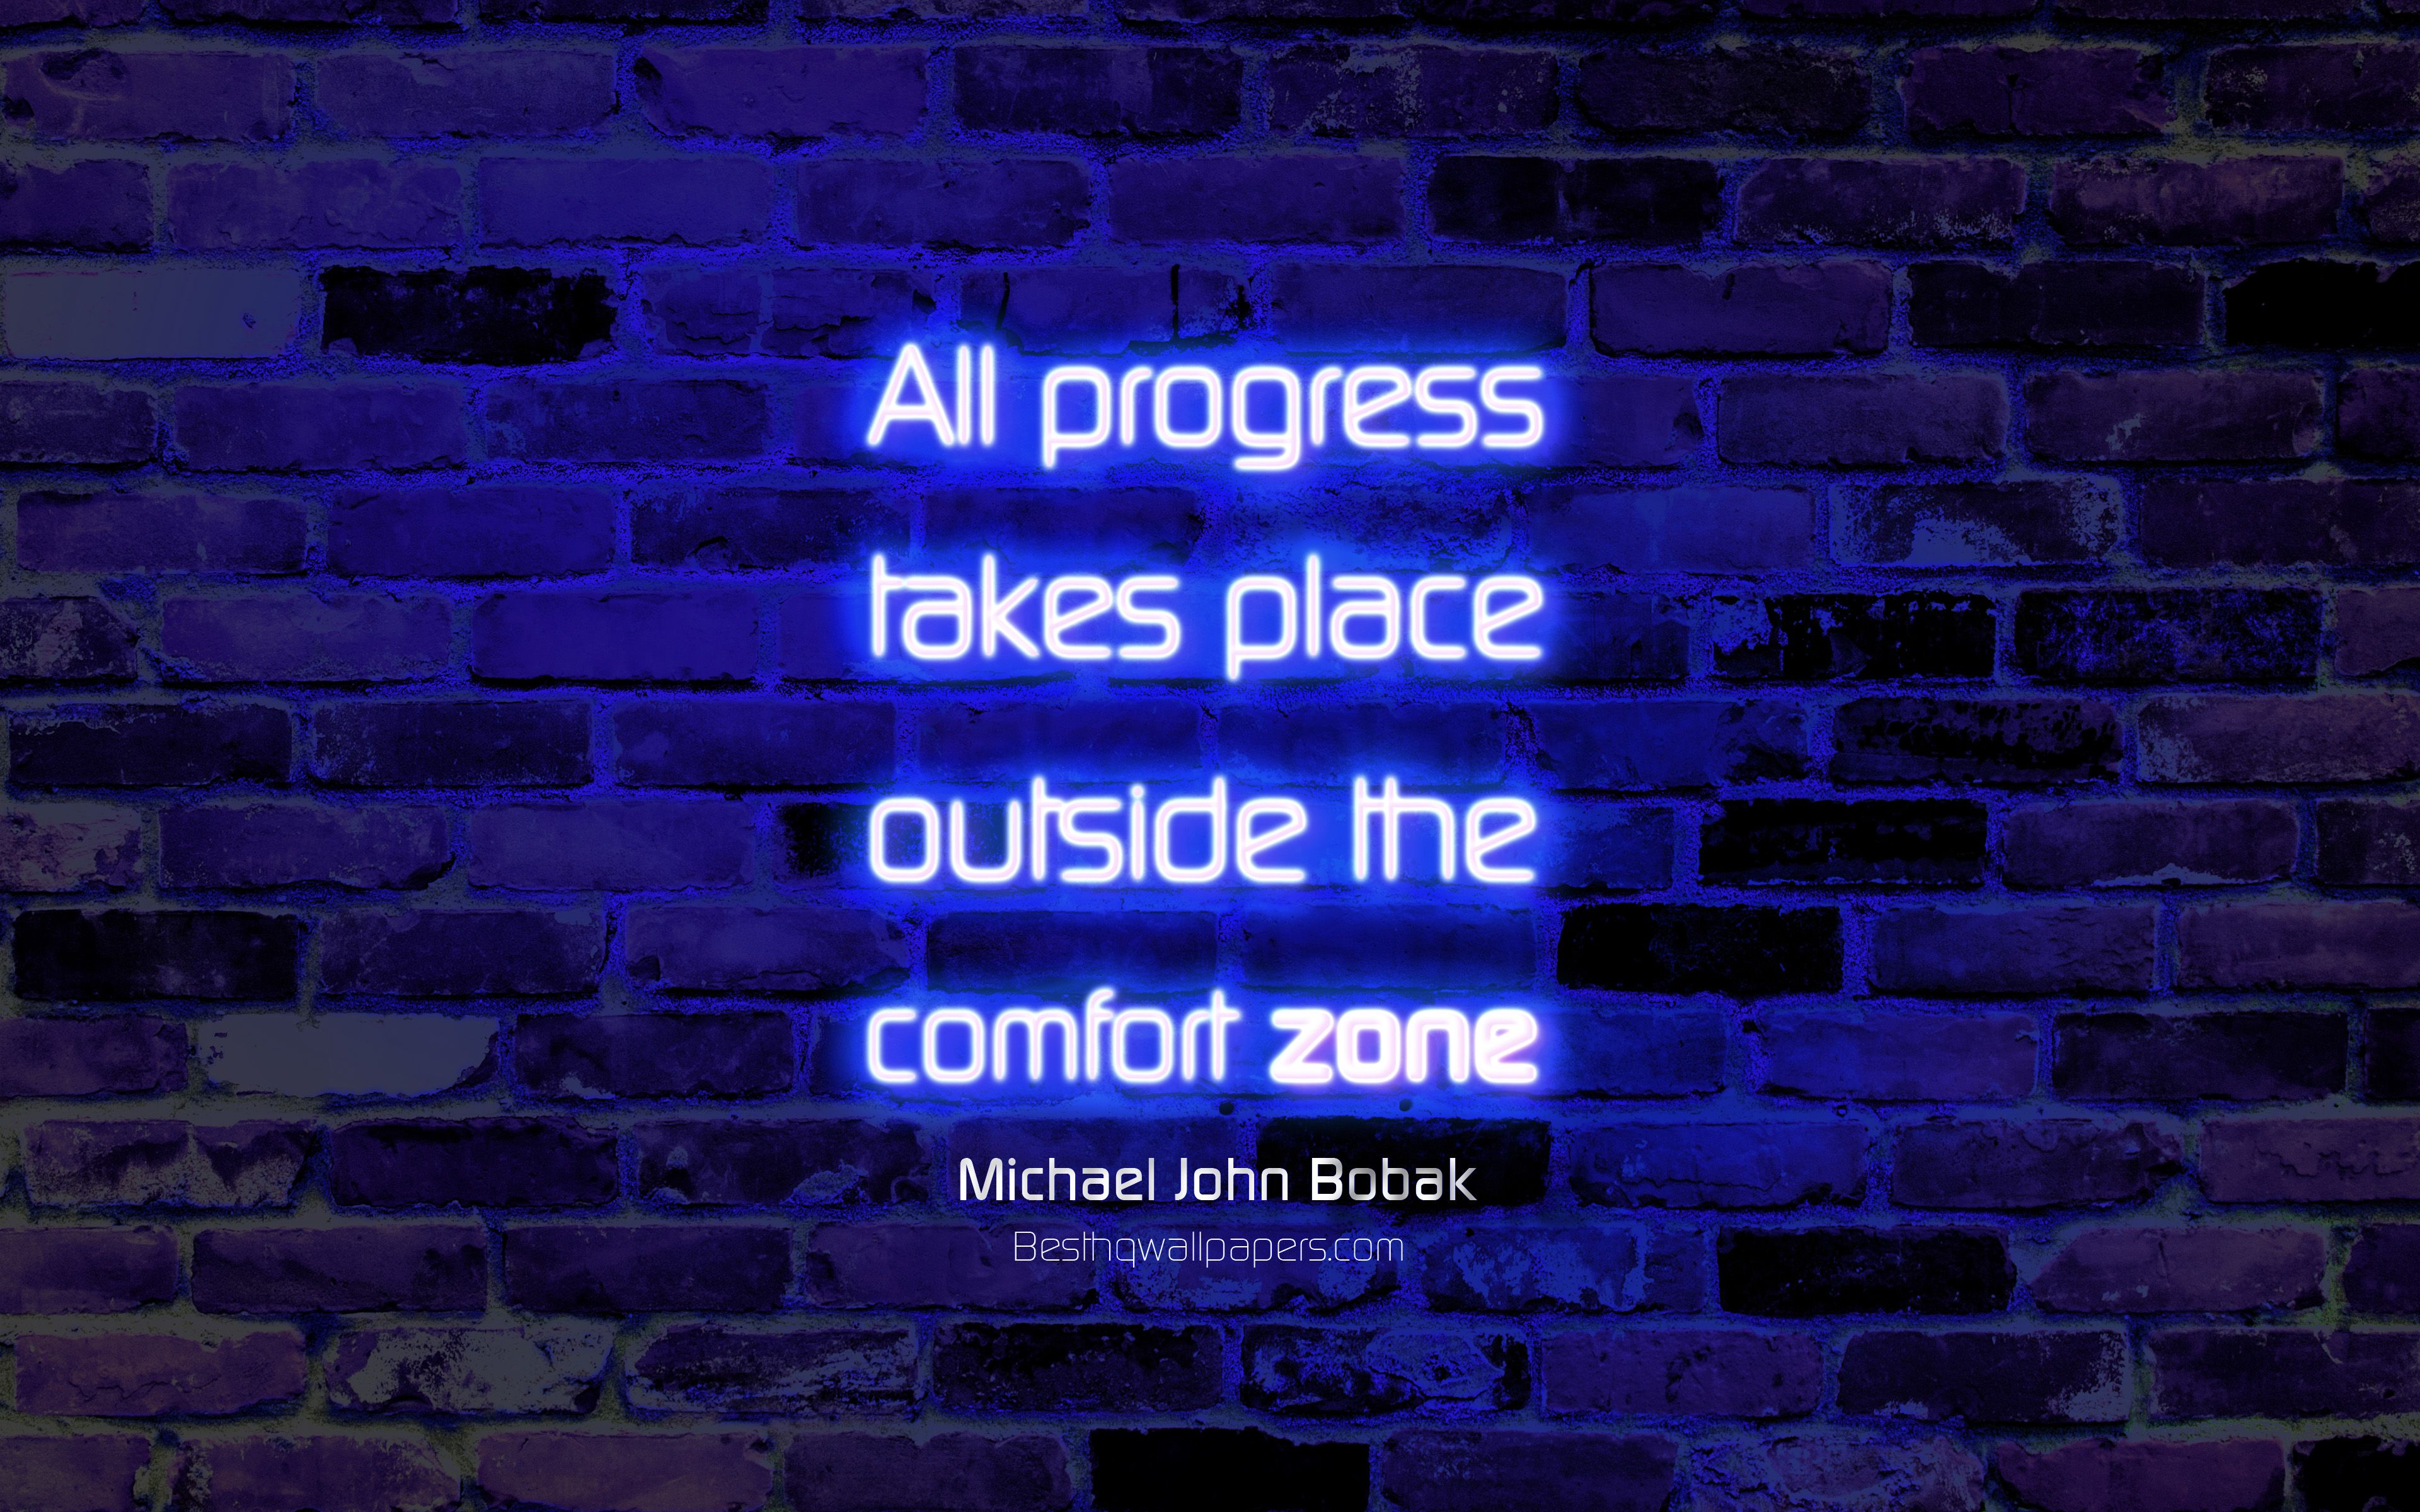 Download wallpaper All progress takes place outside the comfort zone, 4k, blue brick wall, Michael John Bobak Quotes, popular quotes, business quotes, neon text, inspiration, Michael John Bobak, quotes about progress for